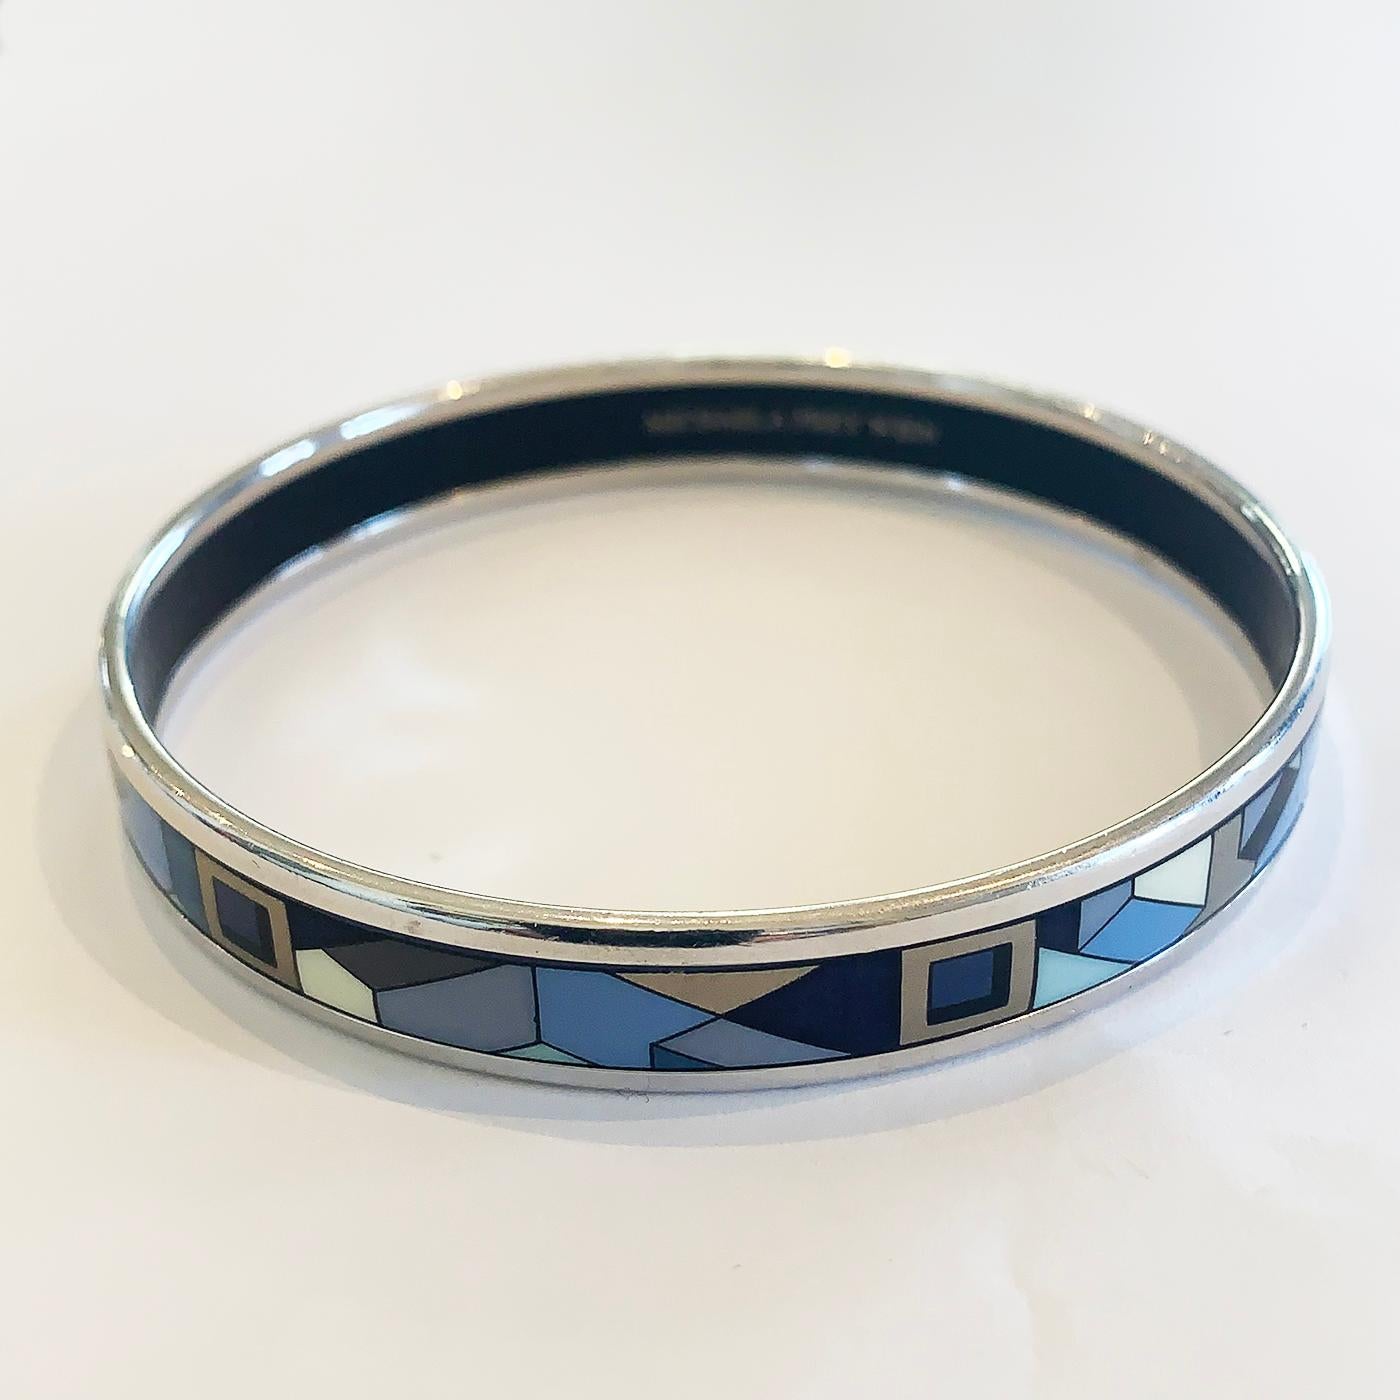 Rare Michaela Frey Bangle in polychrome colour Enamels in the Cloisonné Style. Intricate Geometric design in blue, black and multi coloured metallic finishes. Originally manufacturer based in Vienna, Austria founded in 1951. Totally perfect with no